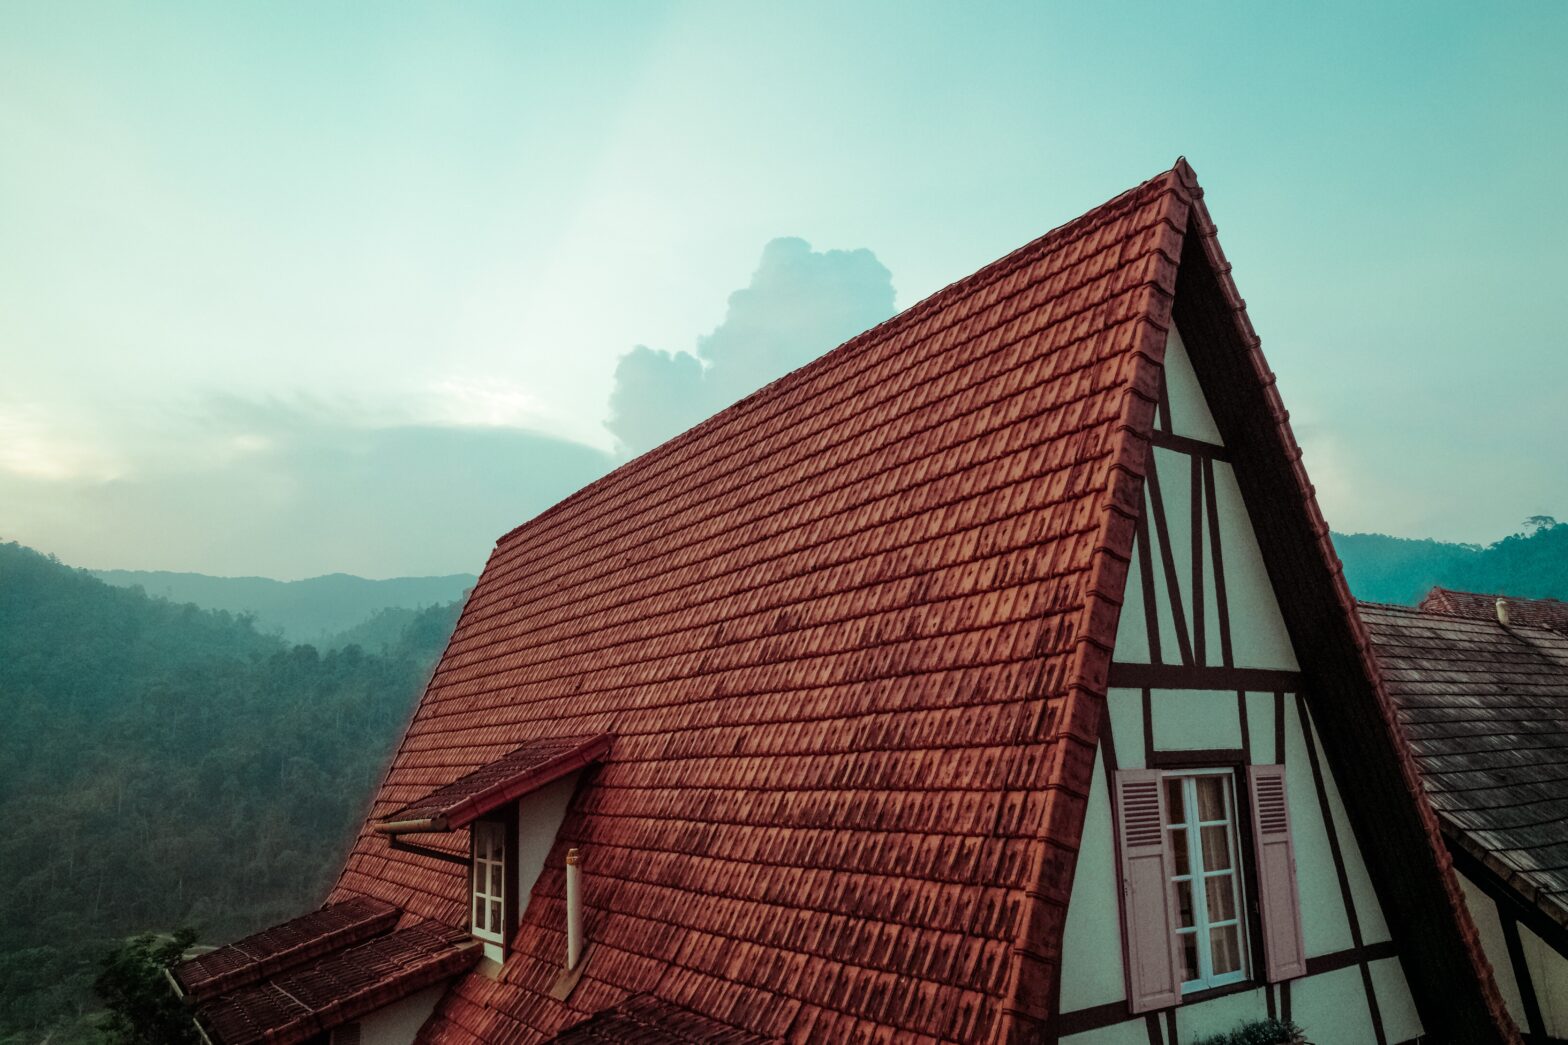 A steep roof with forestry in the background